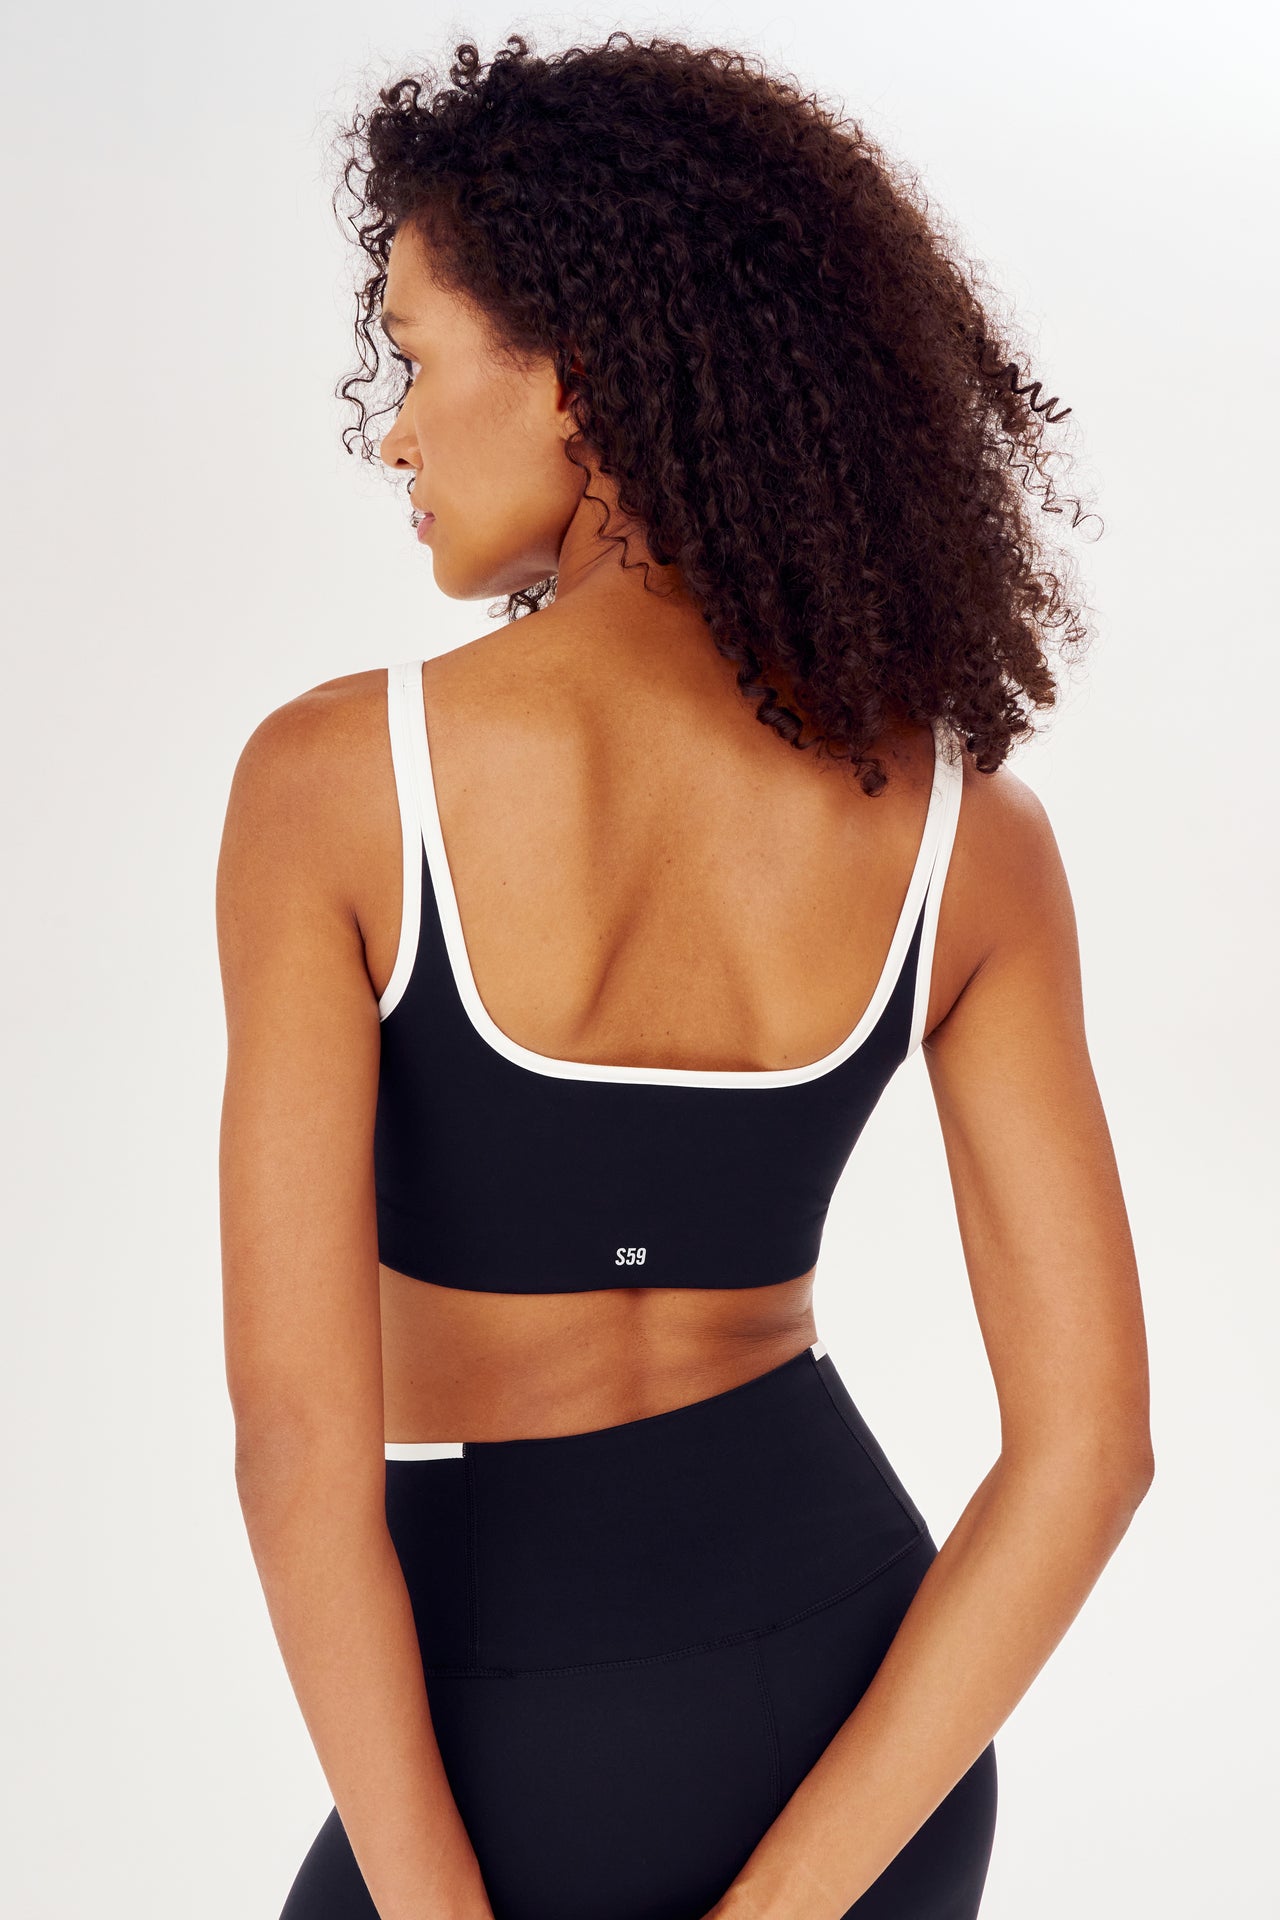 The back view of a woman wearing a SPLITS59 Cait Rigor Bra in Black/White, designed for high impact workouts.